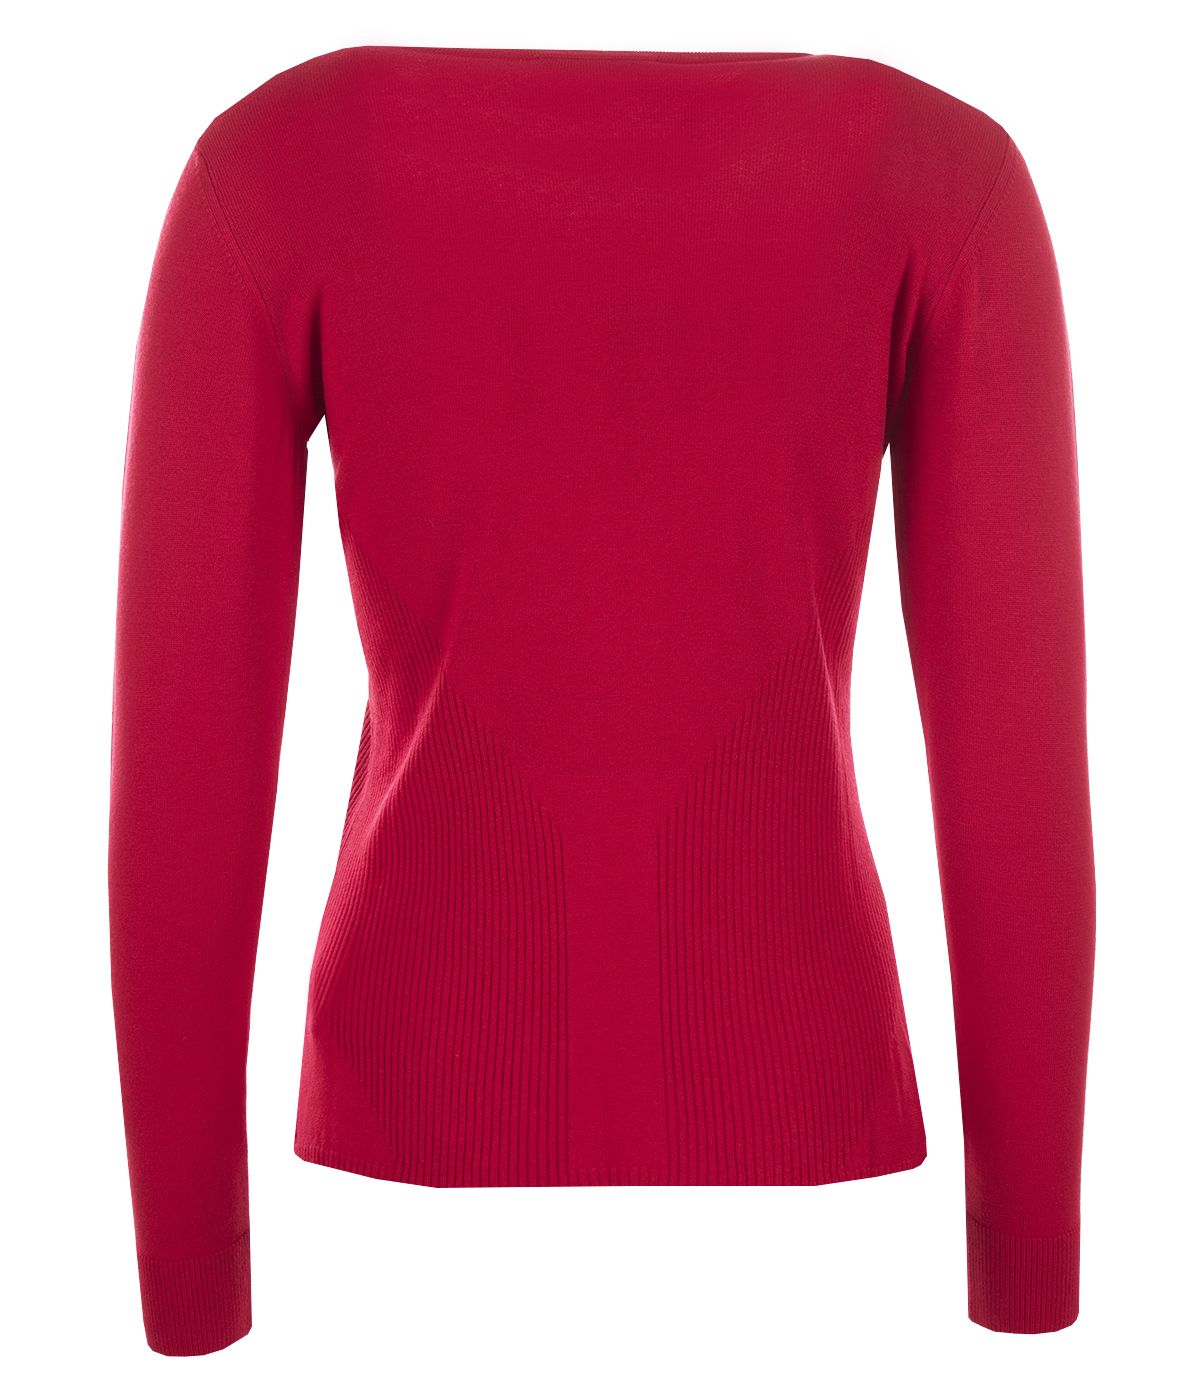 Blouse with long sleeves, round neckline and embossed details, with viscose 1